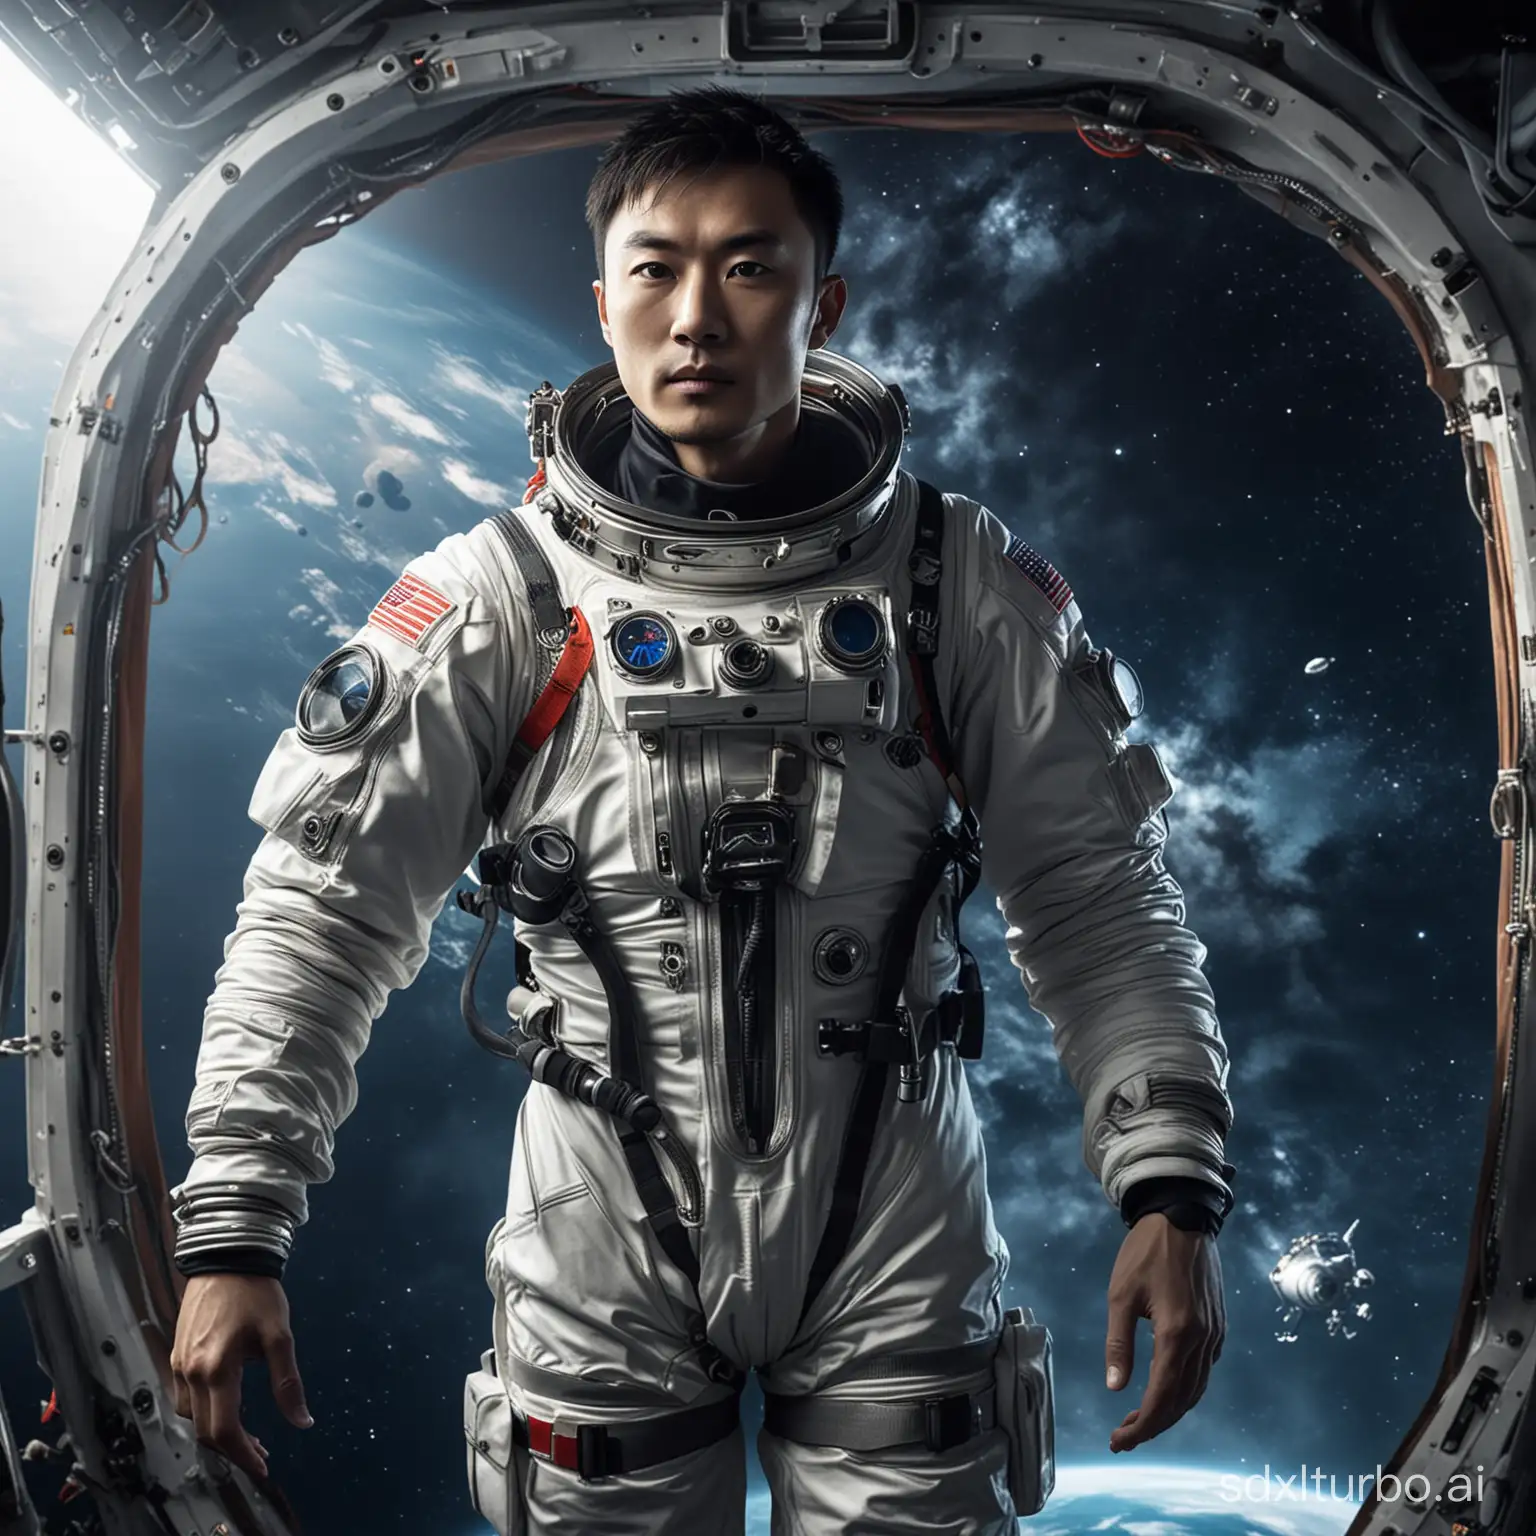 Chinese diving hero Fu Wentao wearing a diving suit aboard the Jiaolong in space. Sci-fi